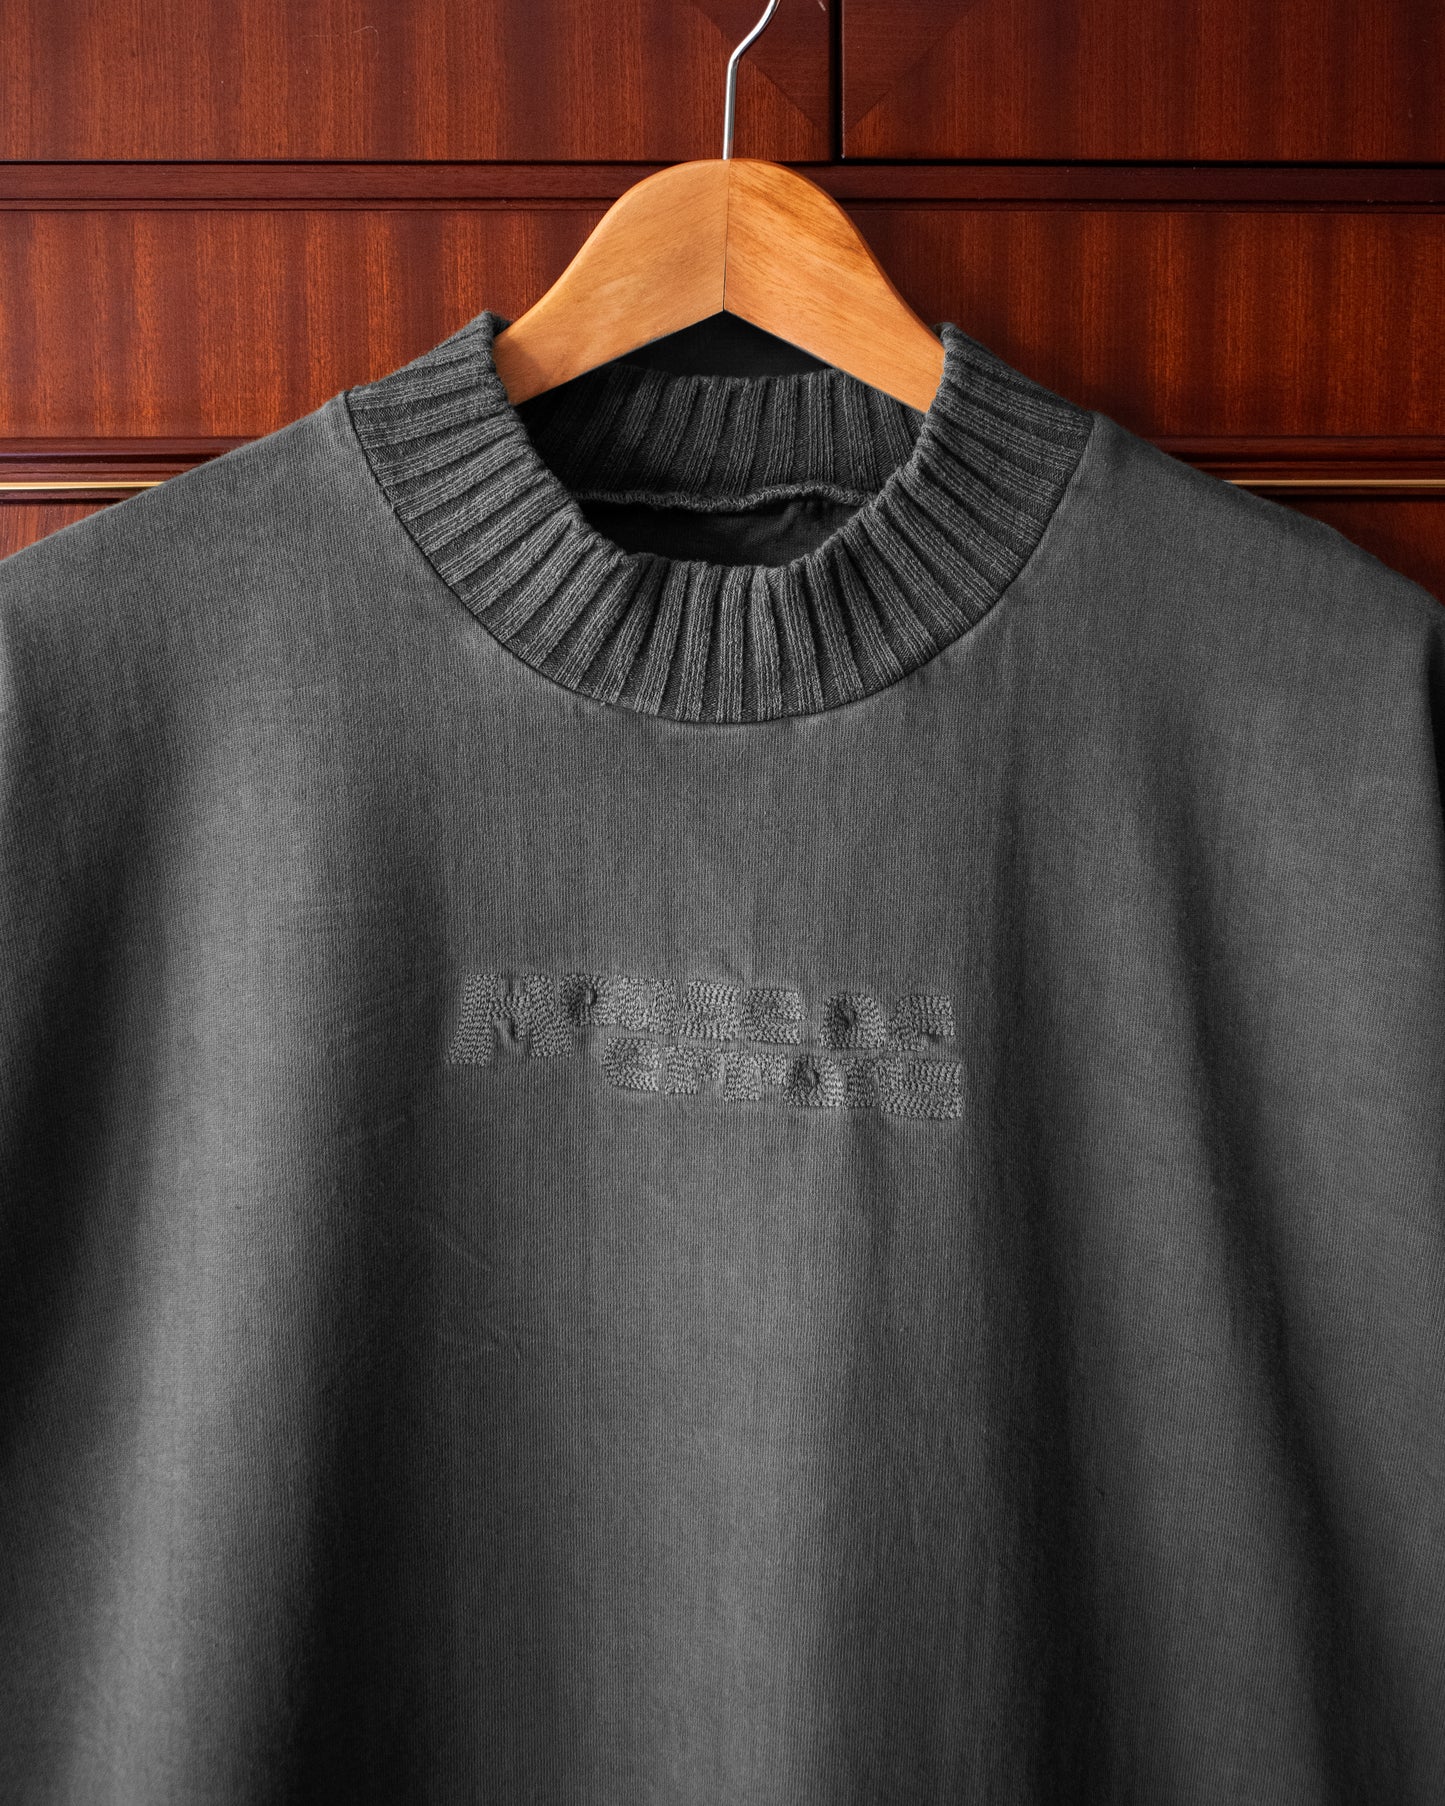 KNIT COLLAR CHAINSTITCH TEE IN SABLE